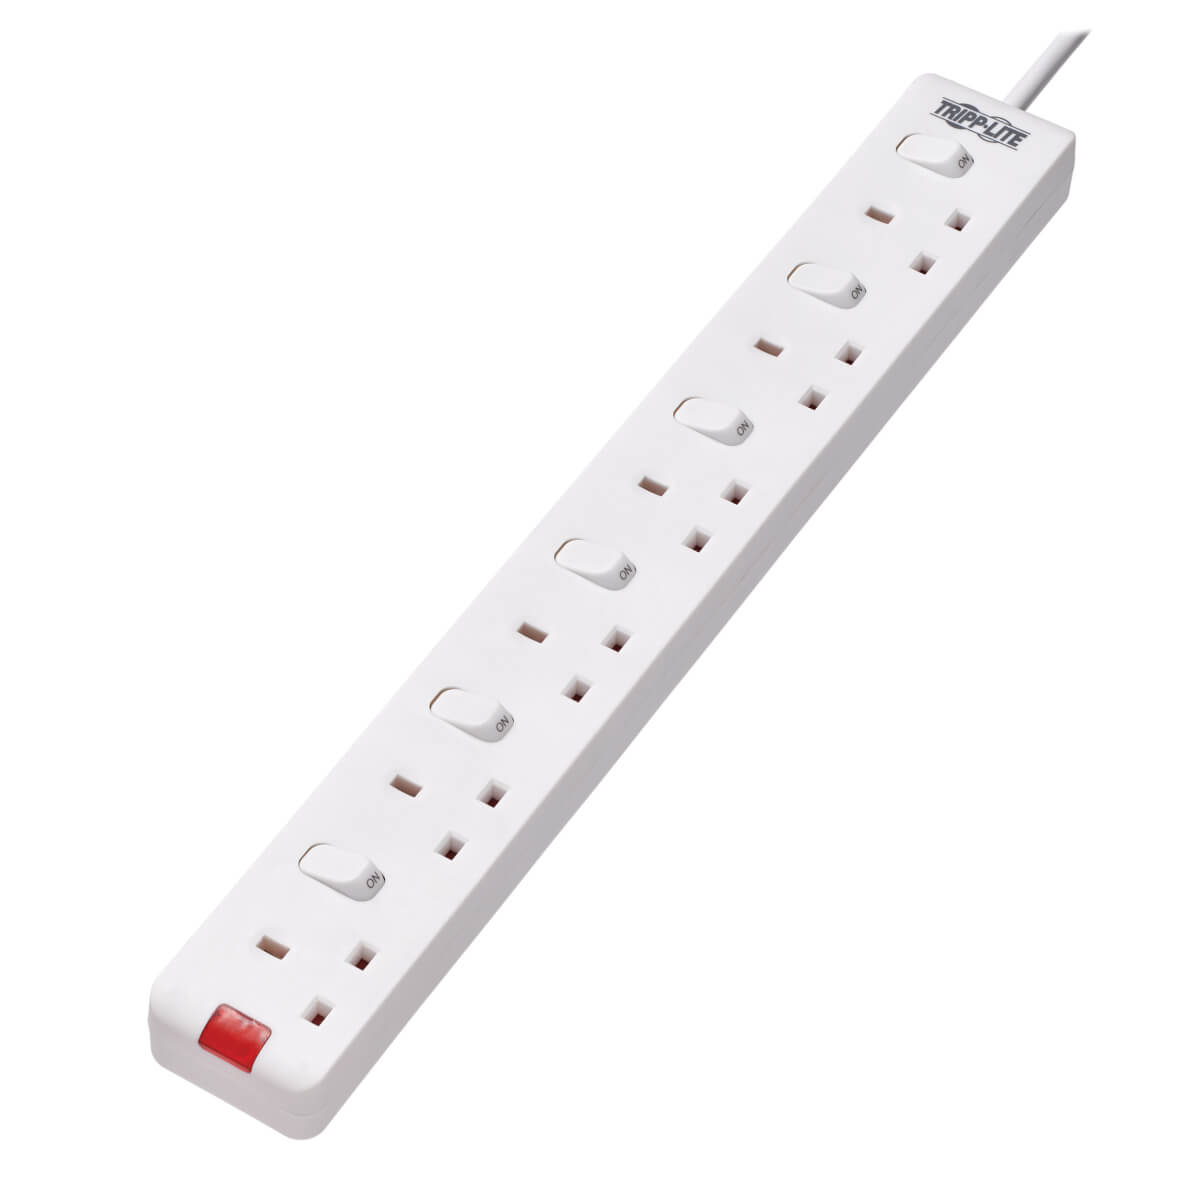 Tripp Lite 6-Outlet Power Strip - British BS1363A Outlets, Individually Switched, 220-250V, 13A, 3 M Cord, White - Power Strip - 13 A - AC 230 V - Input: BS 1363A - Output Connectors: 6 (BS 1 - C2000